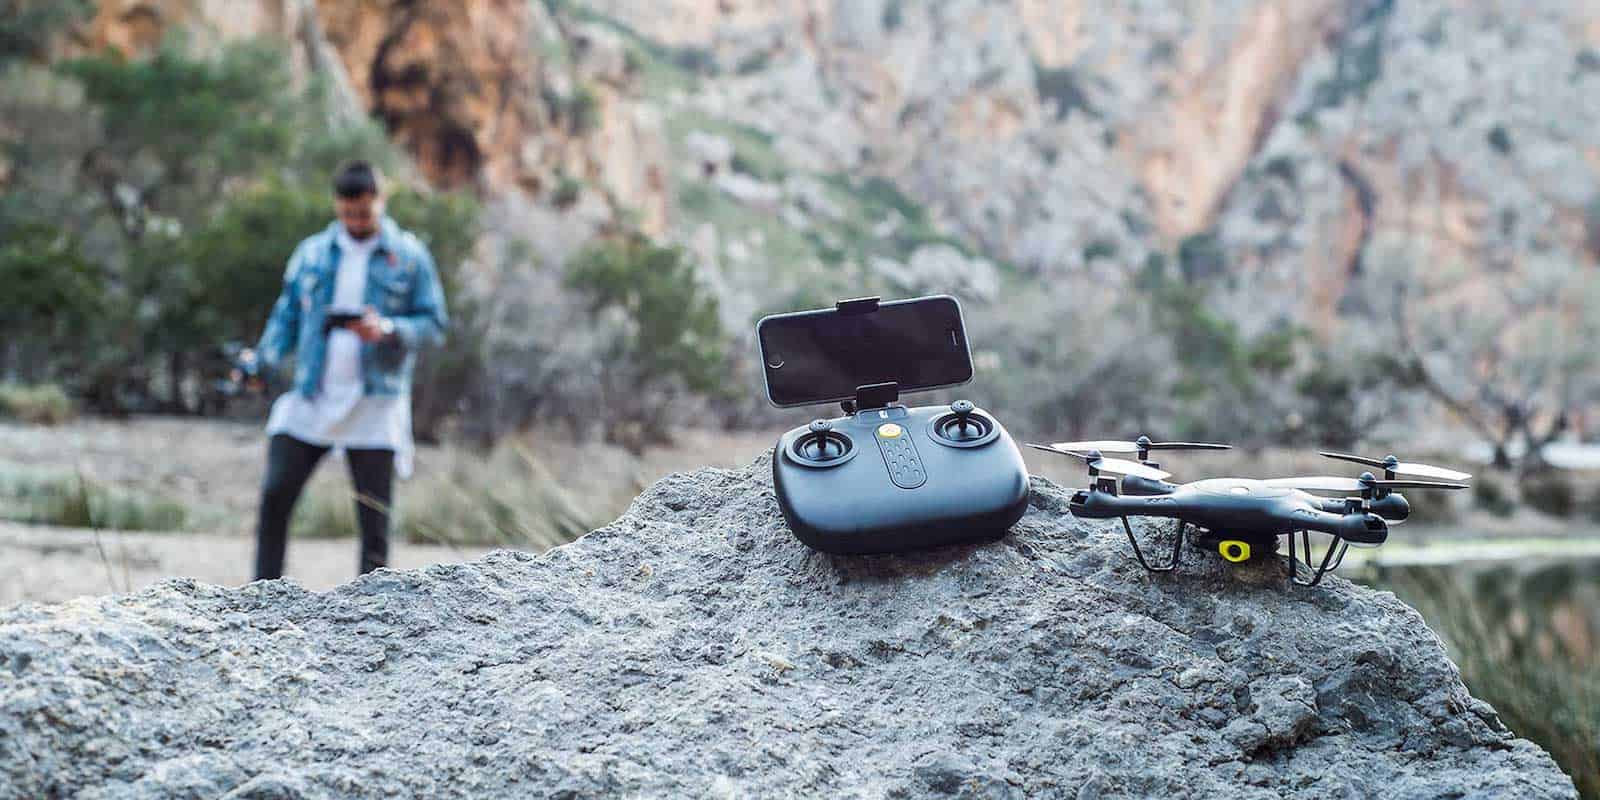 This drone is loaded with features ideal for beginners and pros alike, plus it's super affordable.